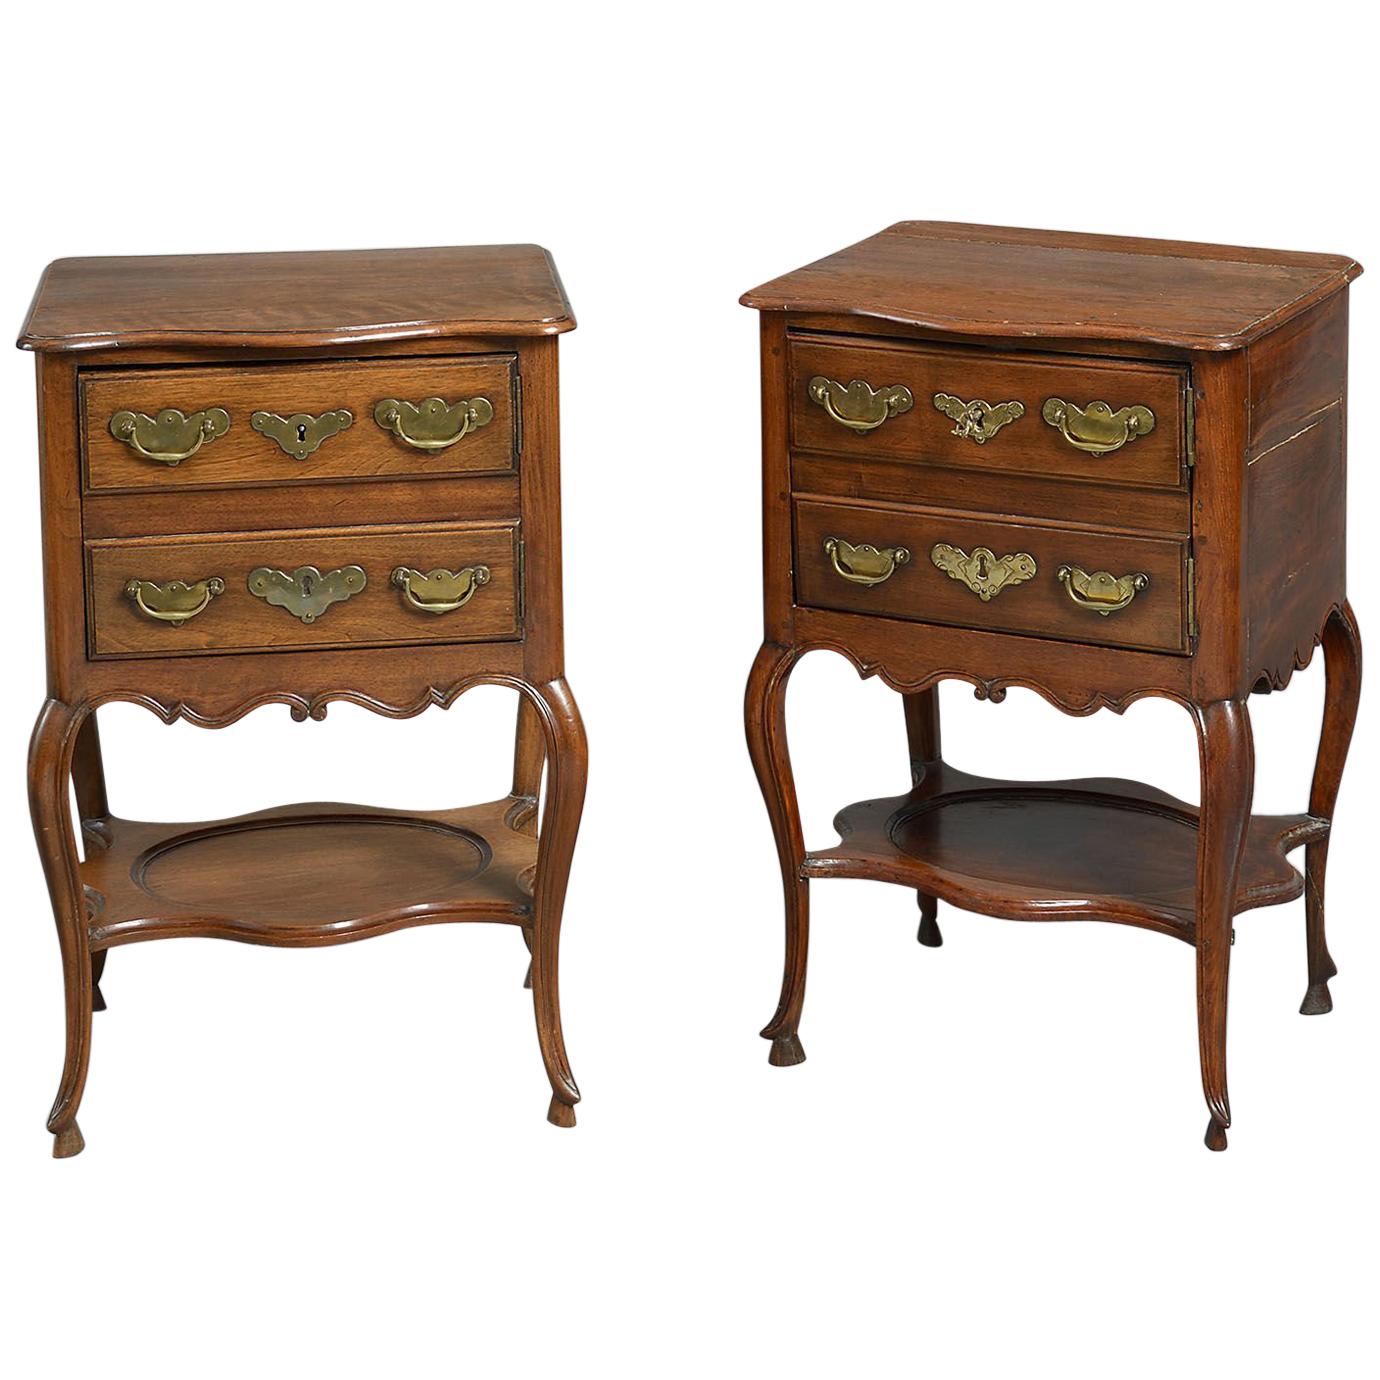 Pair of 18th Century Walnut and Chestnut Bedside Tables